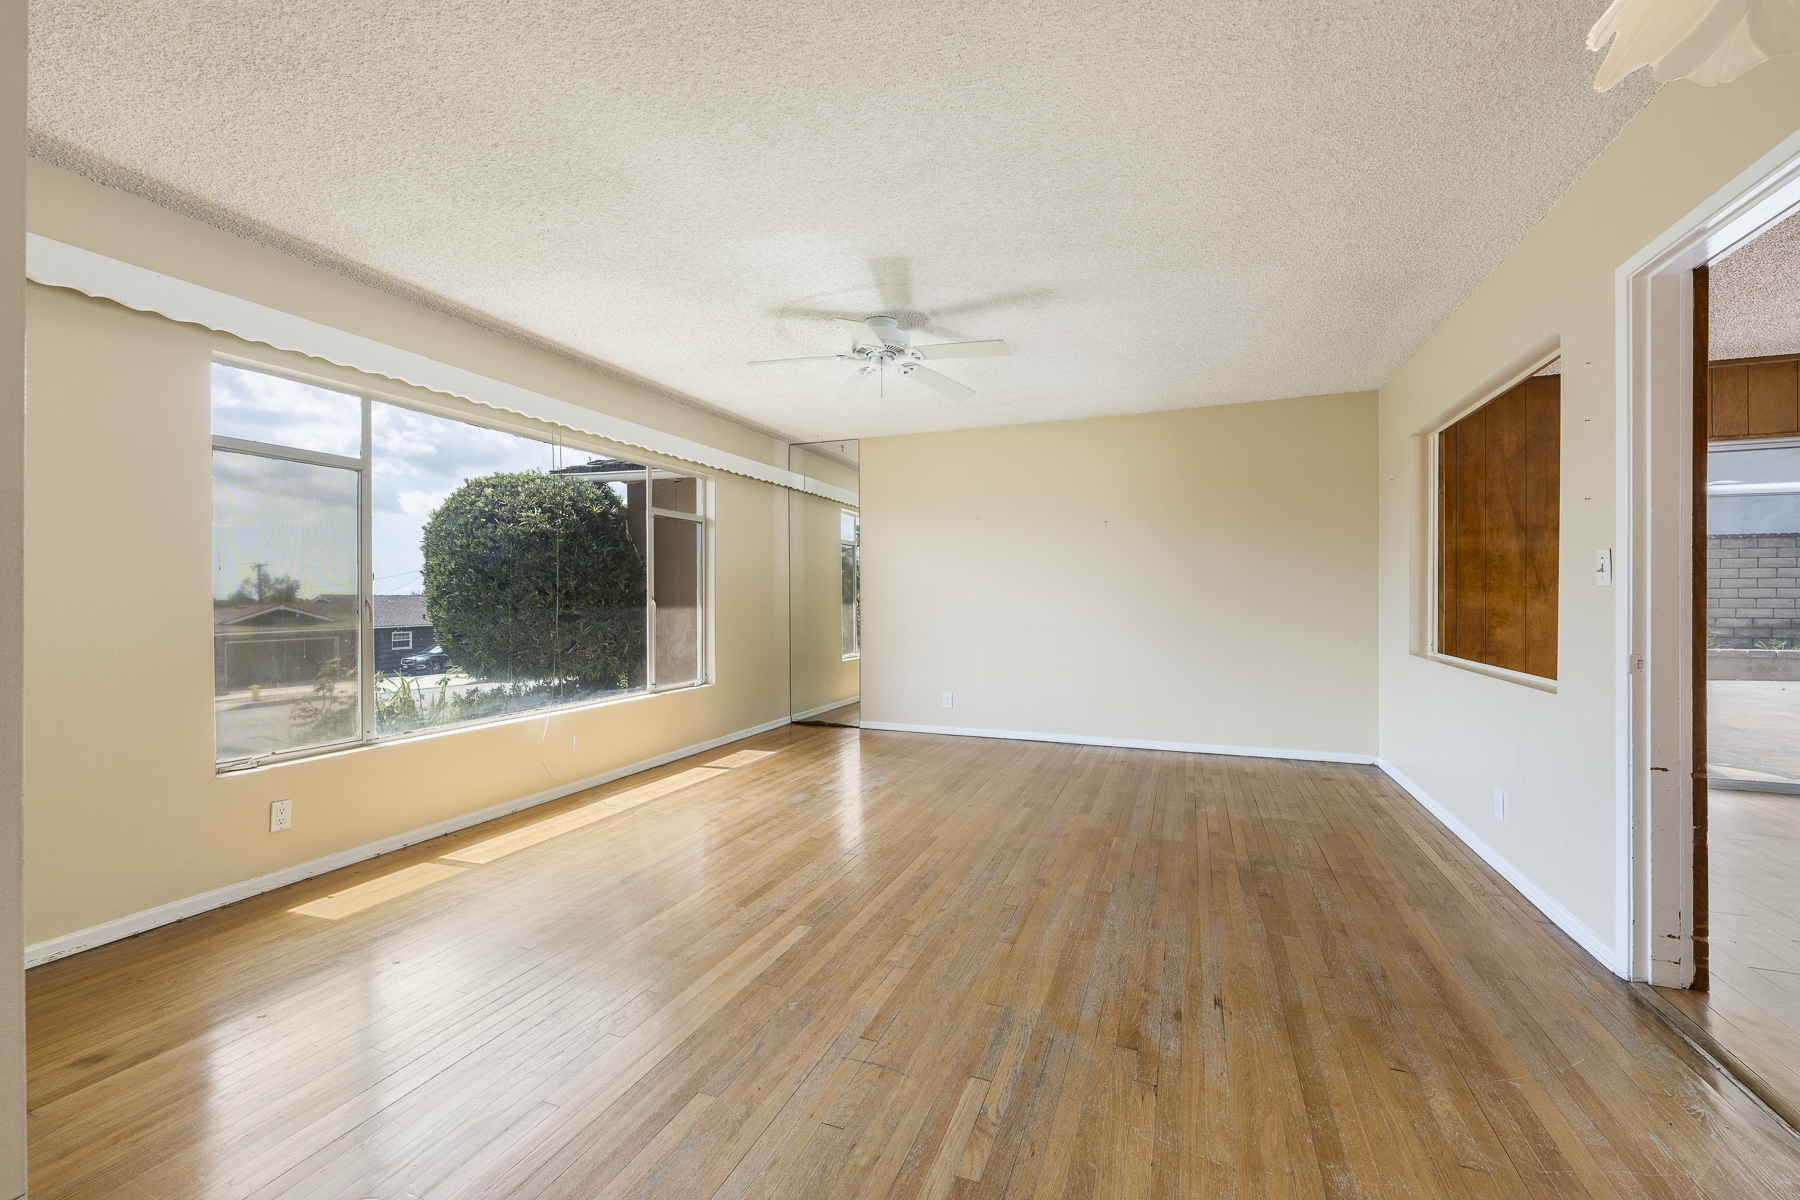 501 Dorothy Drive: Narrow photo of living room space 2